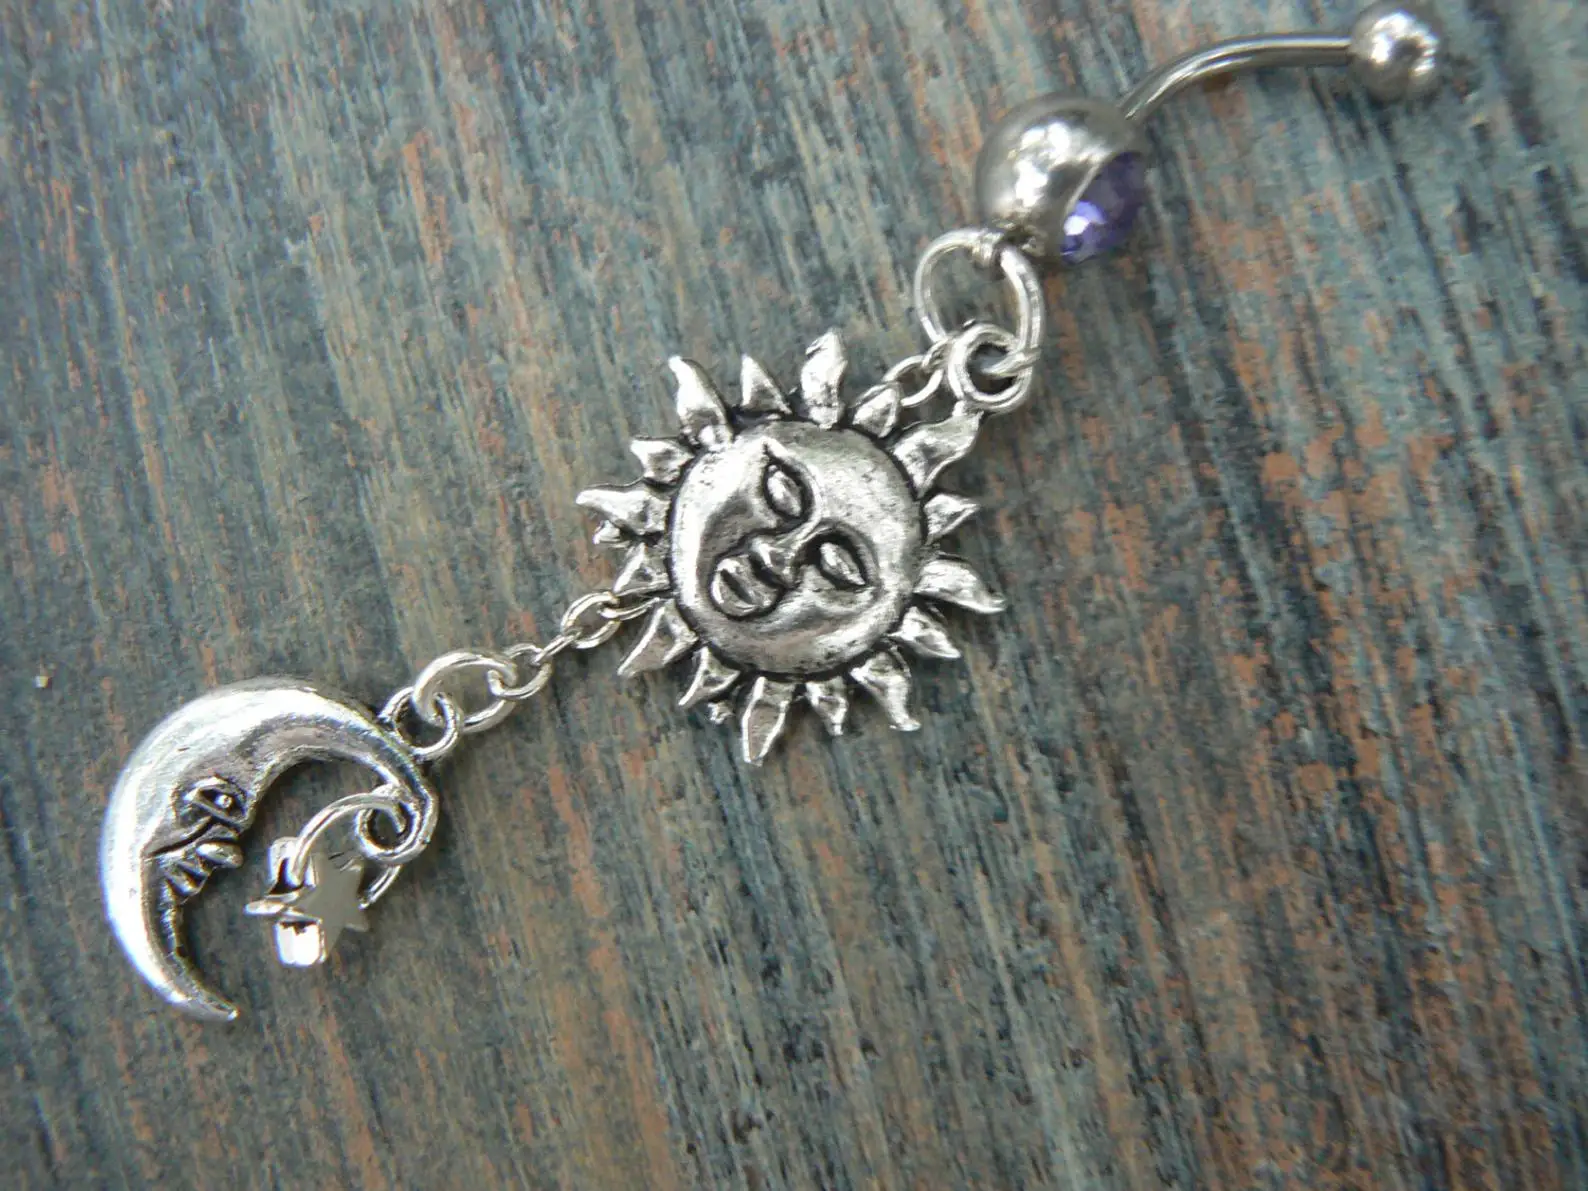 Buy The sun and moon belly ring purple stones stars goddess celestial boho dancer pagen gypsy tribal fusion on